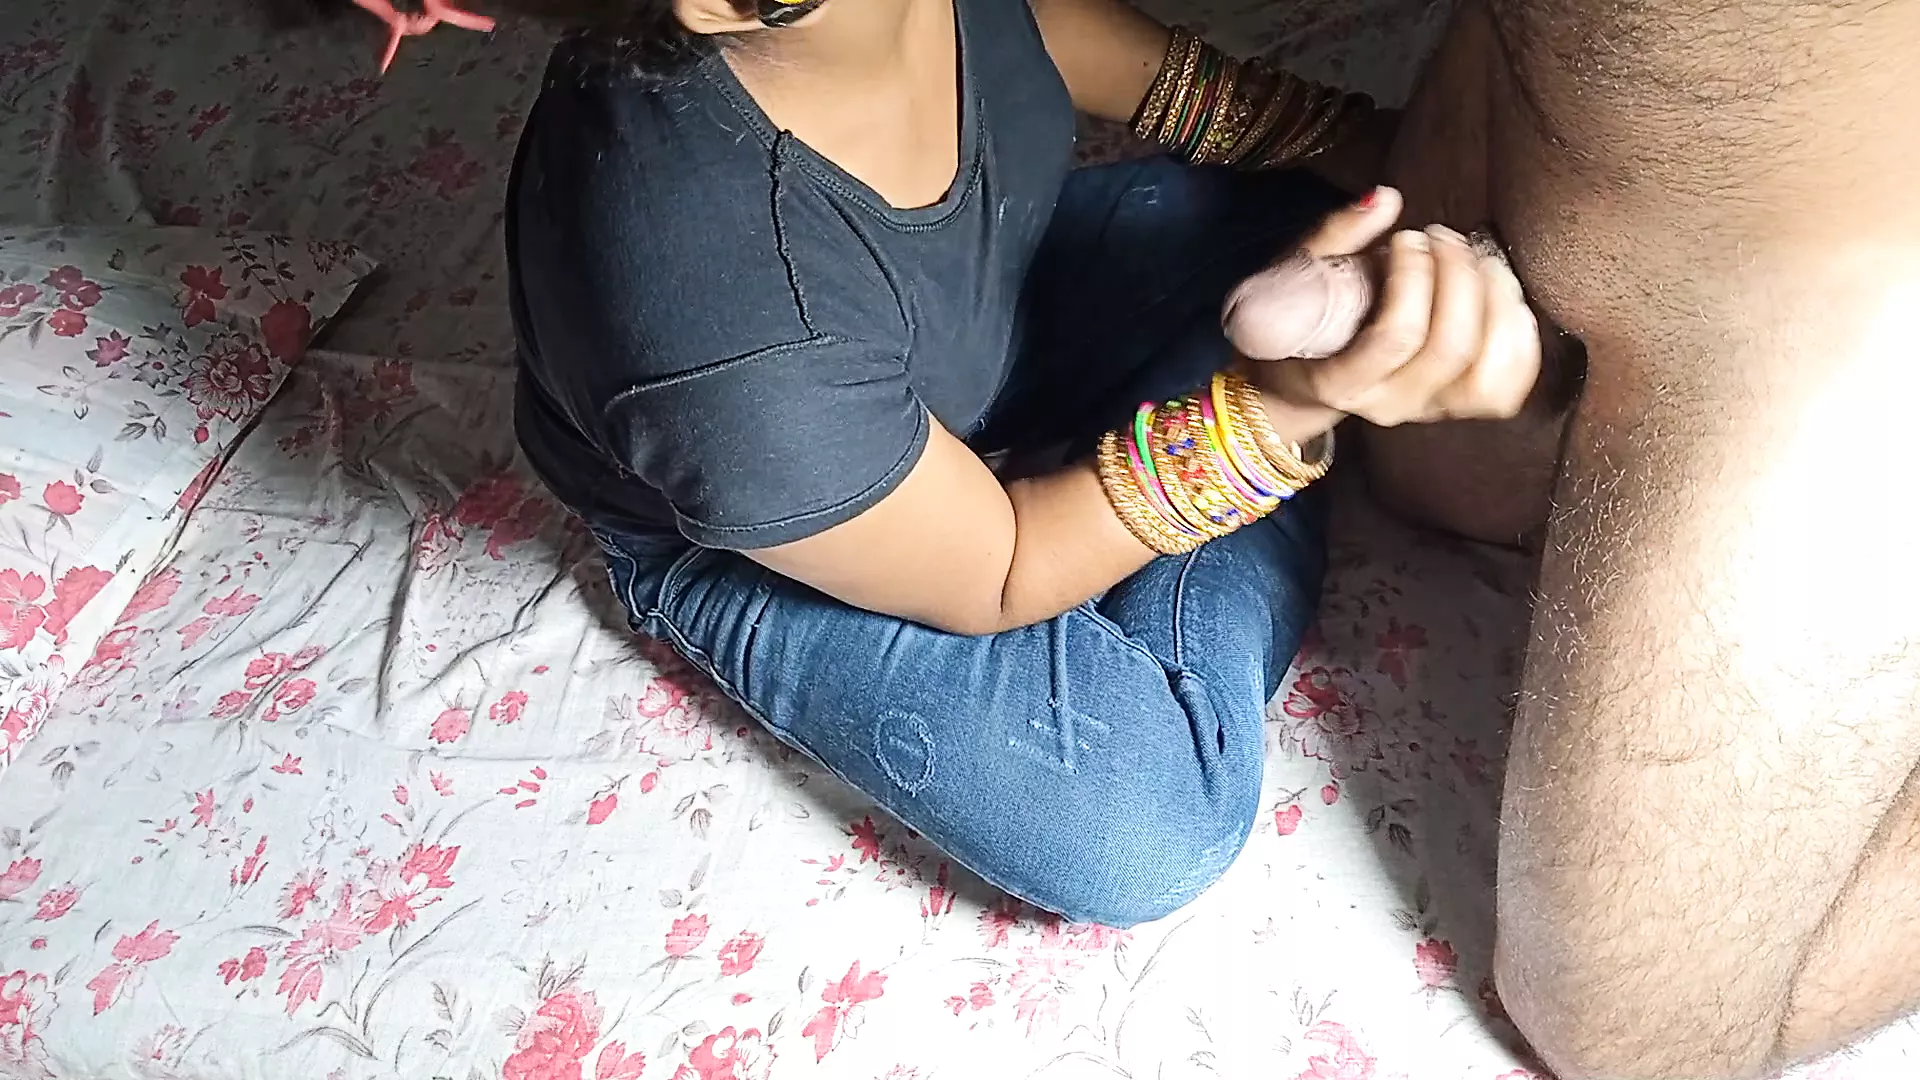 Fucking Neighbors Newly Married Bhabhi After Truth and Dare Game pic